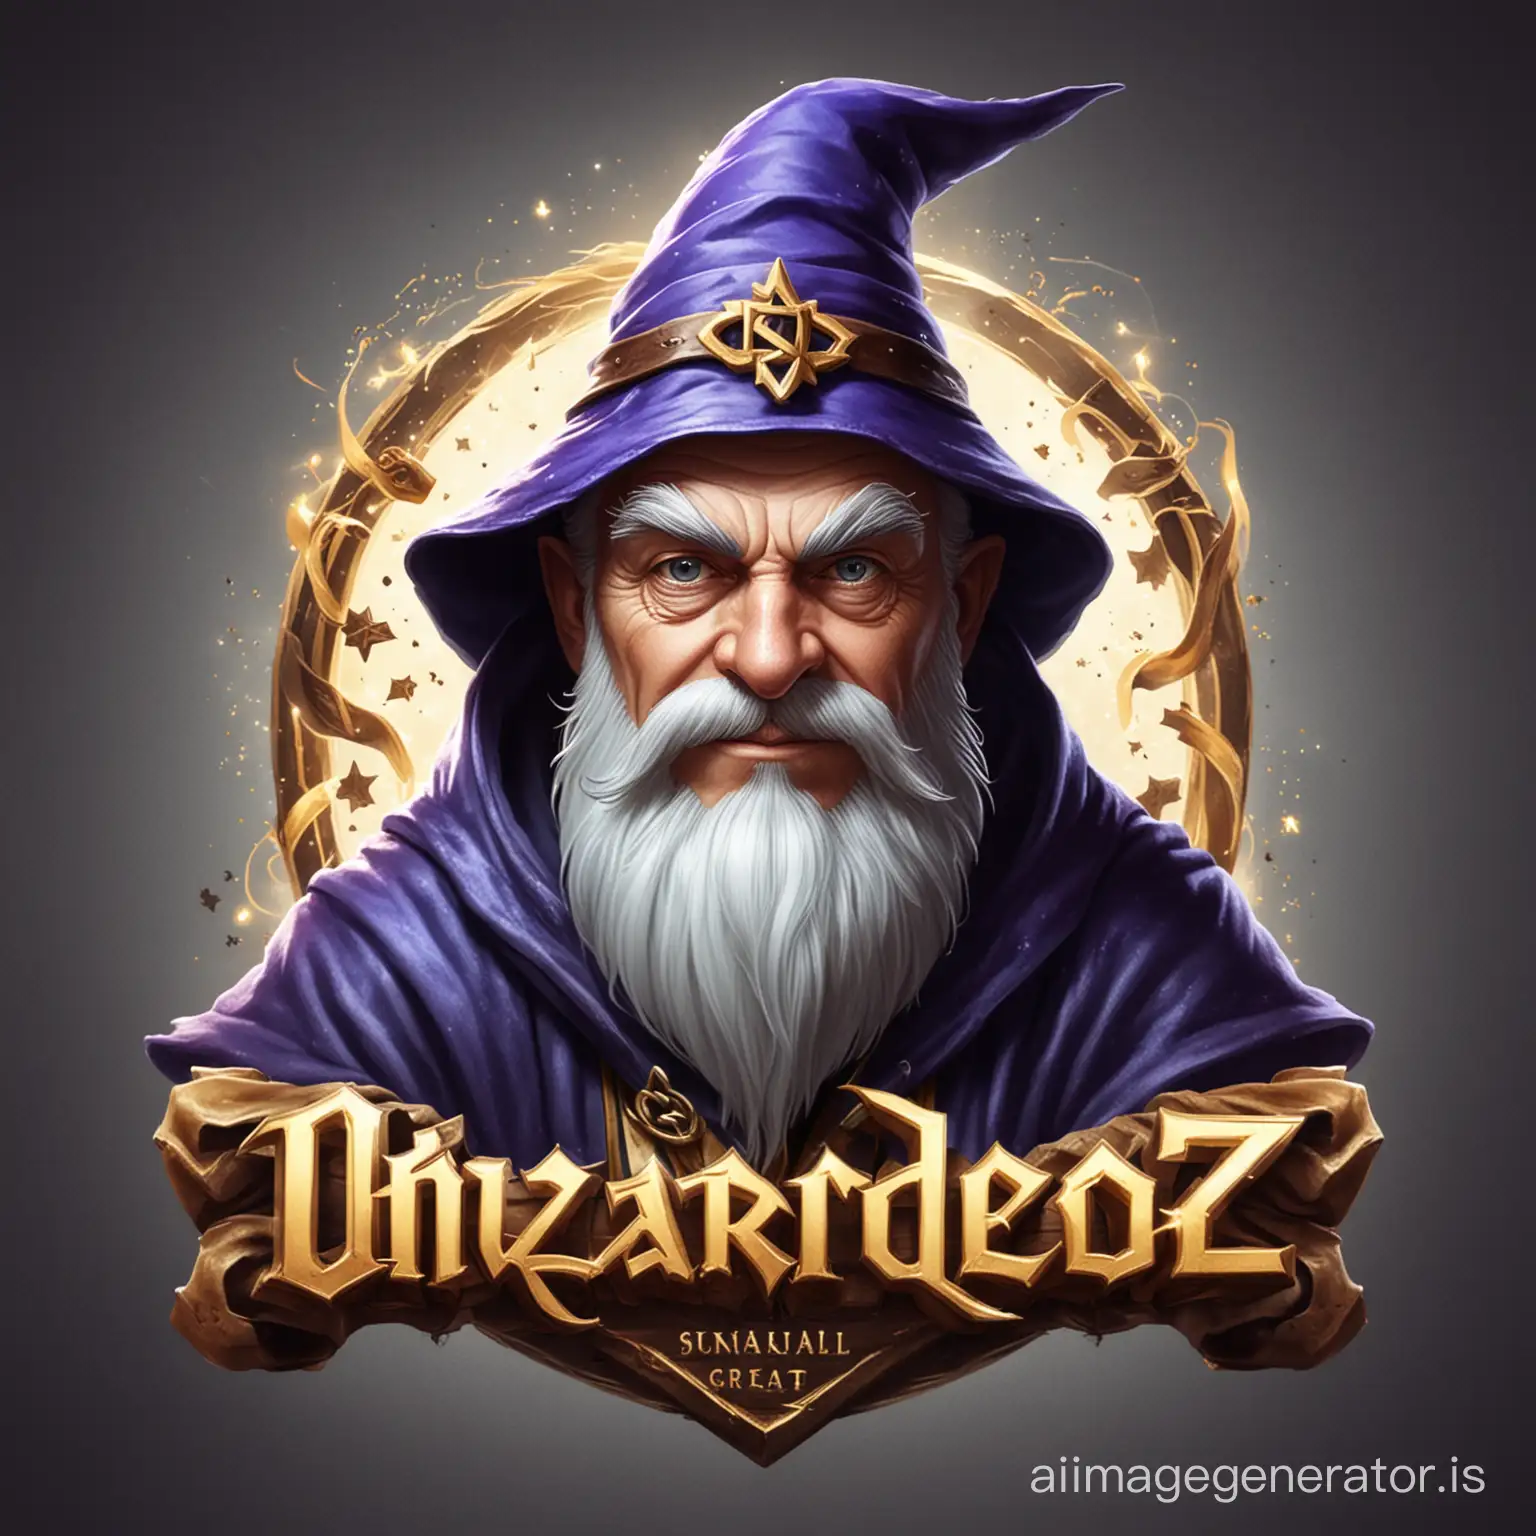 Create a logo of a wizard for a YouTube channel with the name WizardOZTheGreat. Do not include any text in the logo.